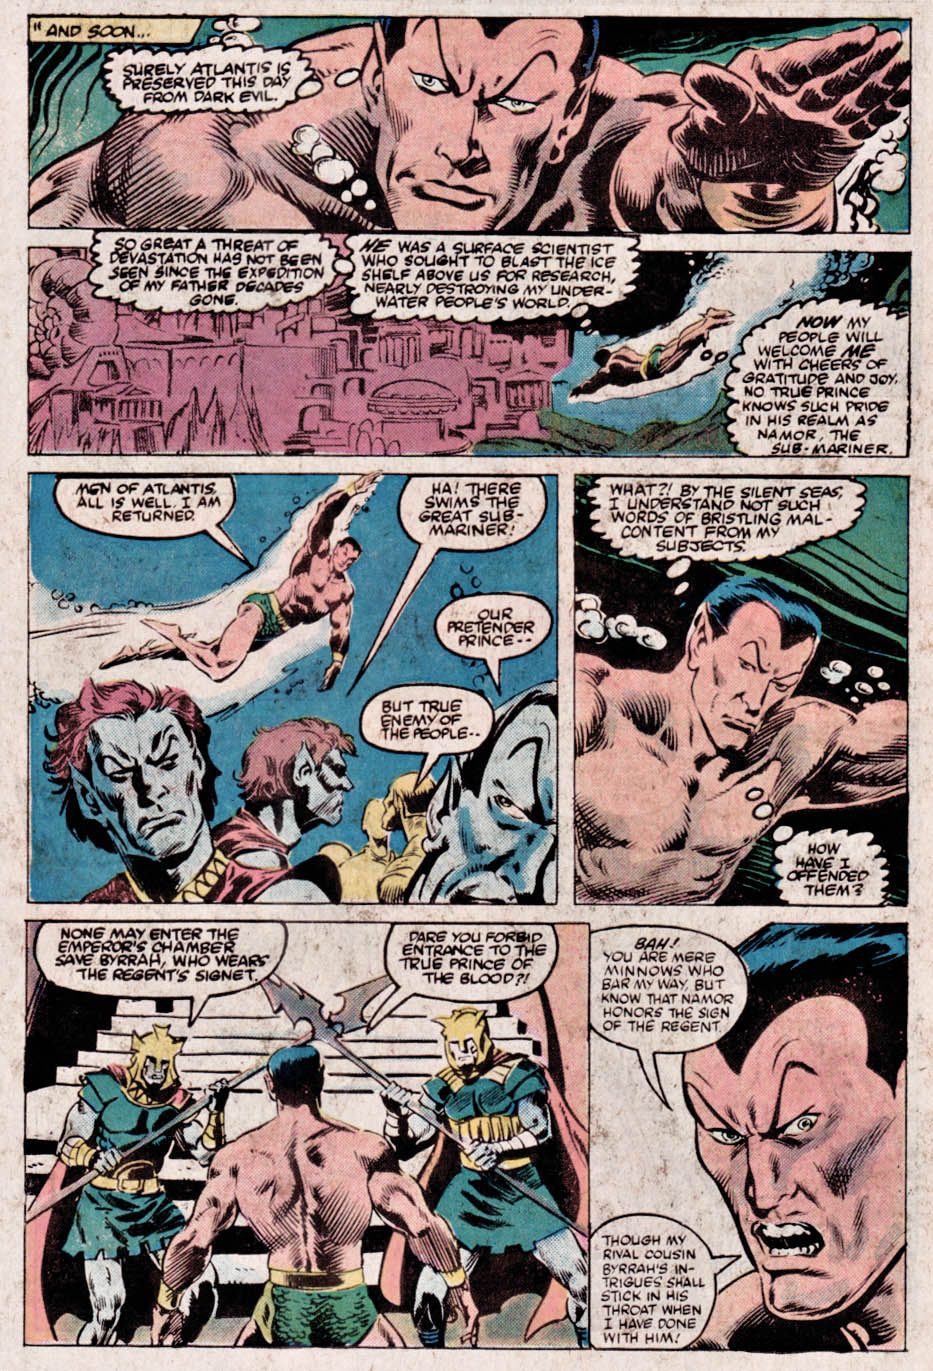 What If? (1977) issue 41 - The Sub-mariner had saved Atlantis from its destiny - Page 11